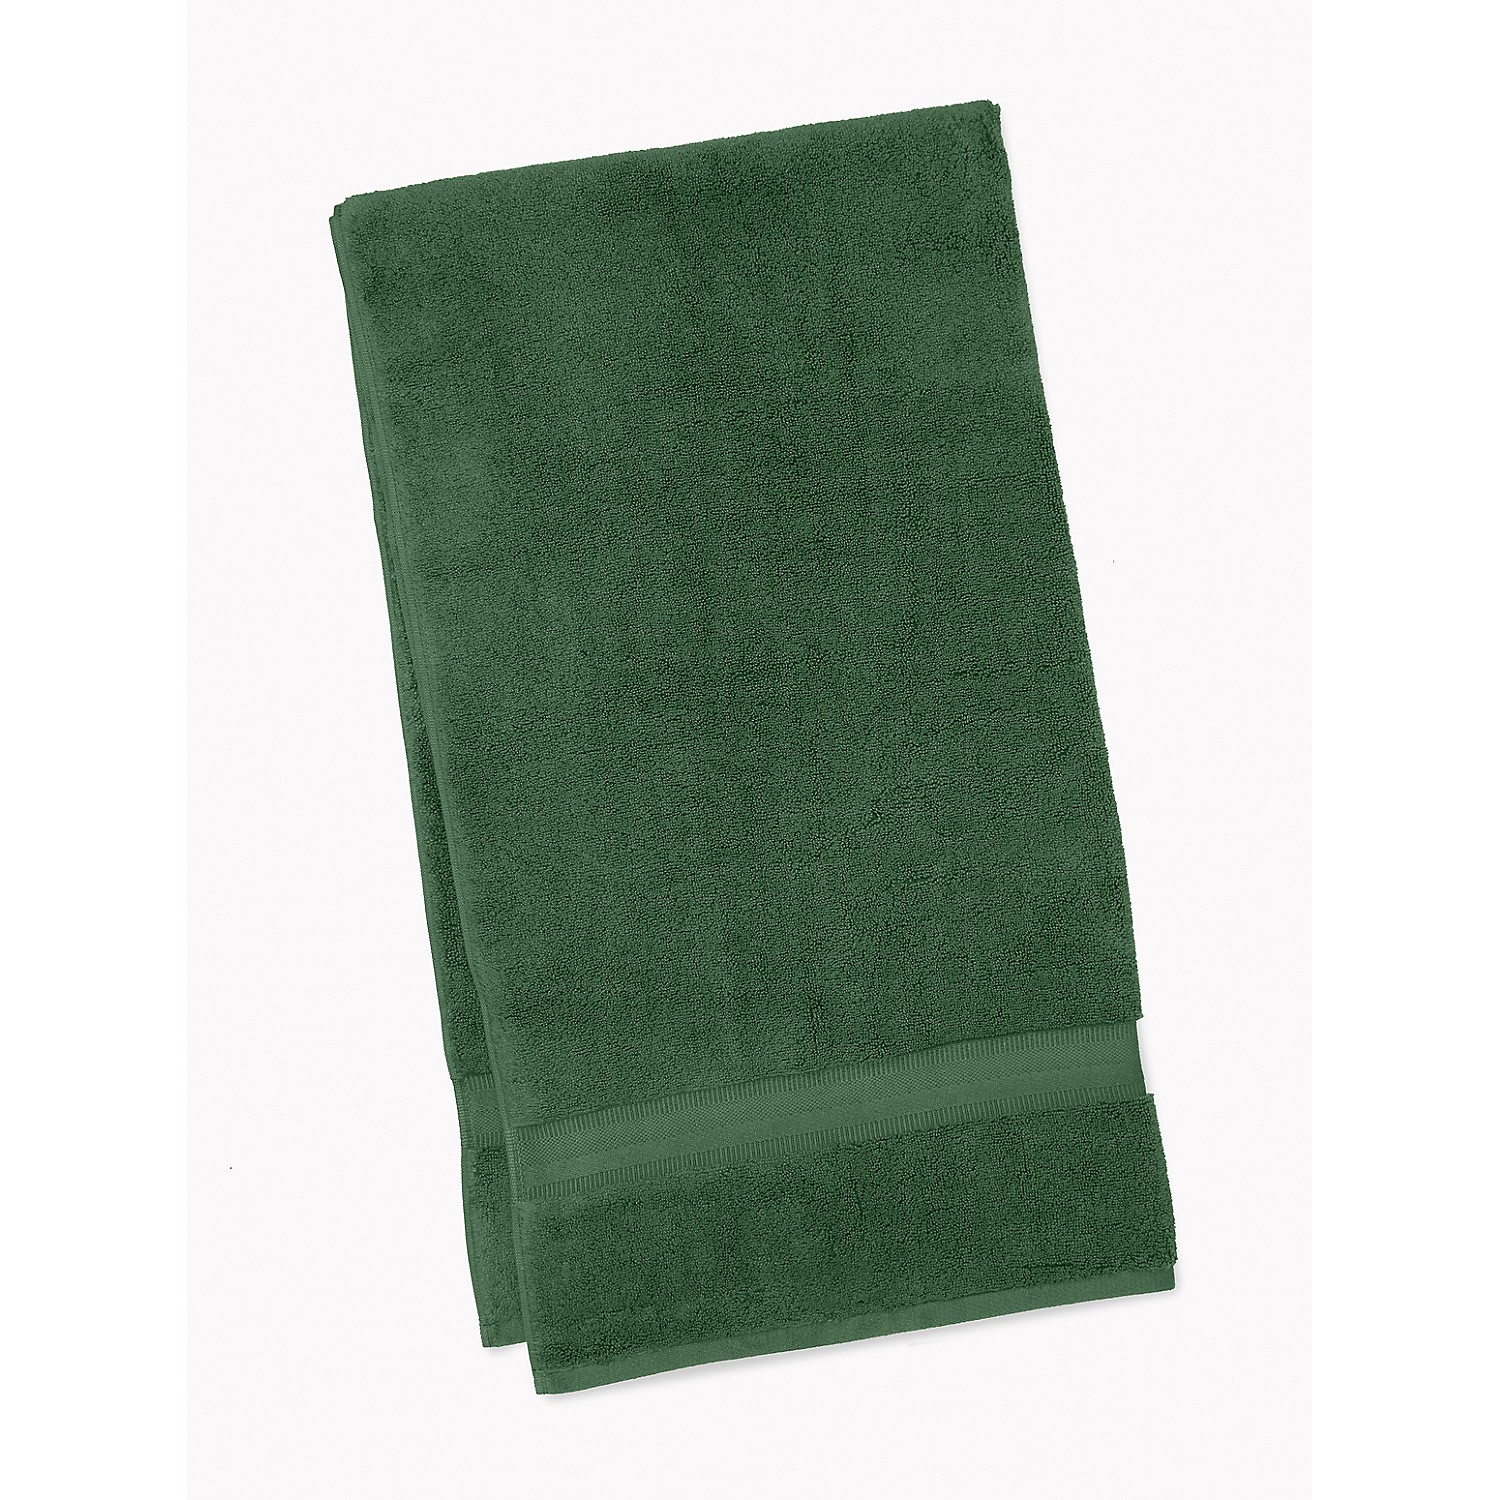 TOMMY HILFIGER Signature Solid Bath Towel in Pine Needle